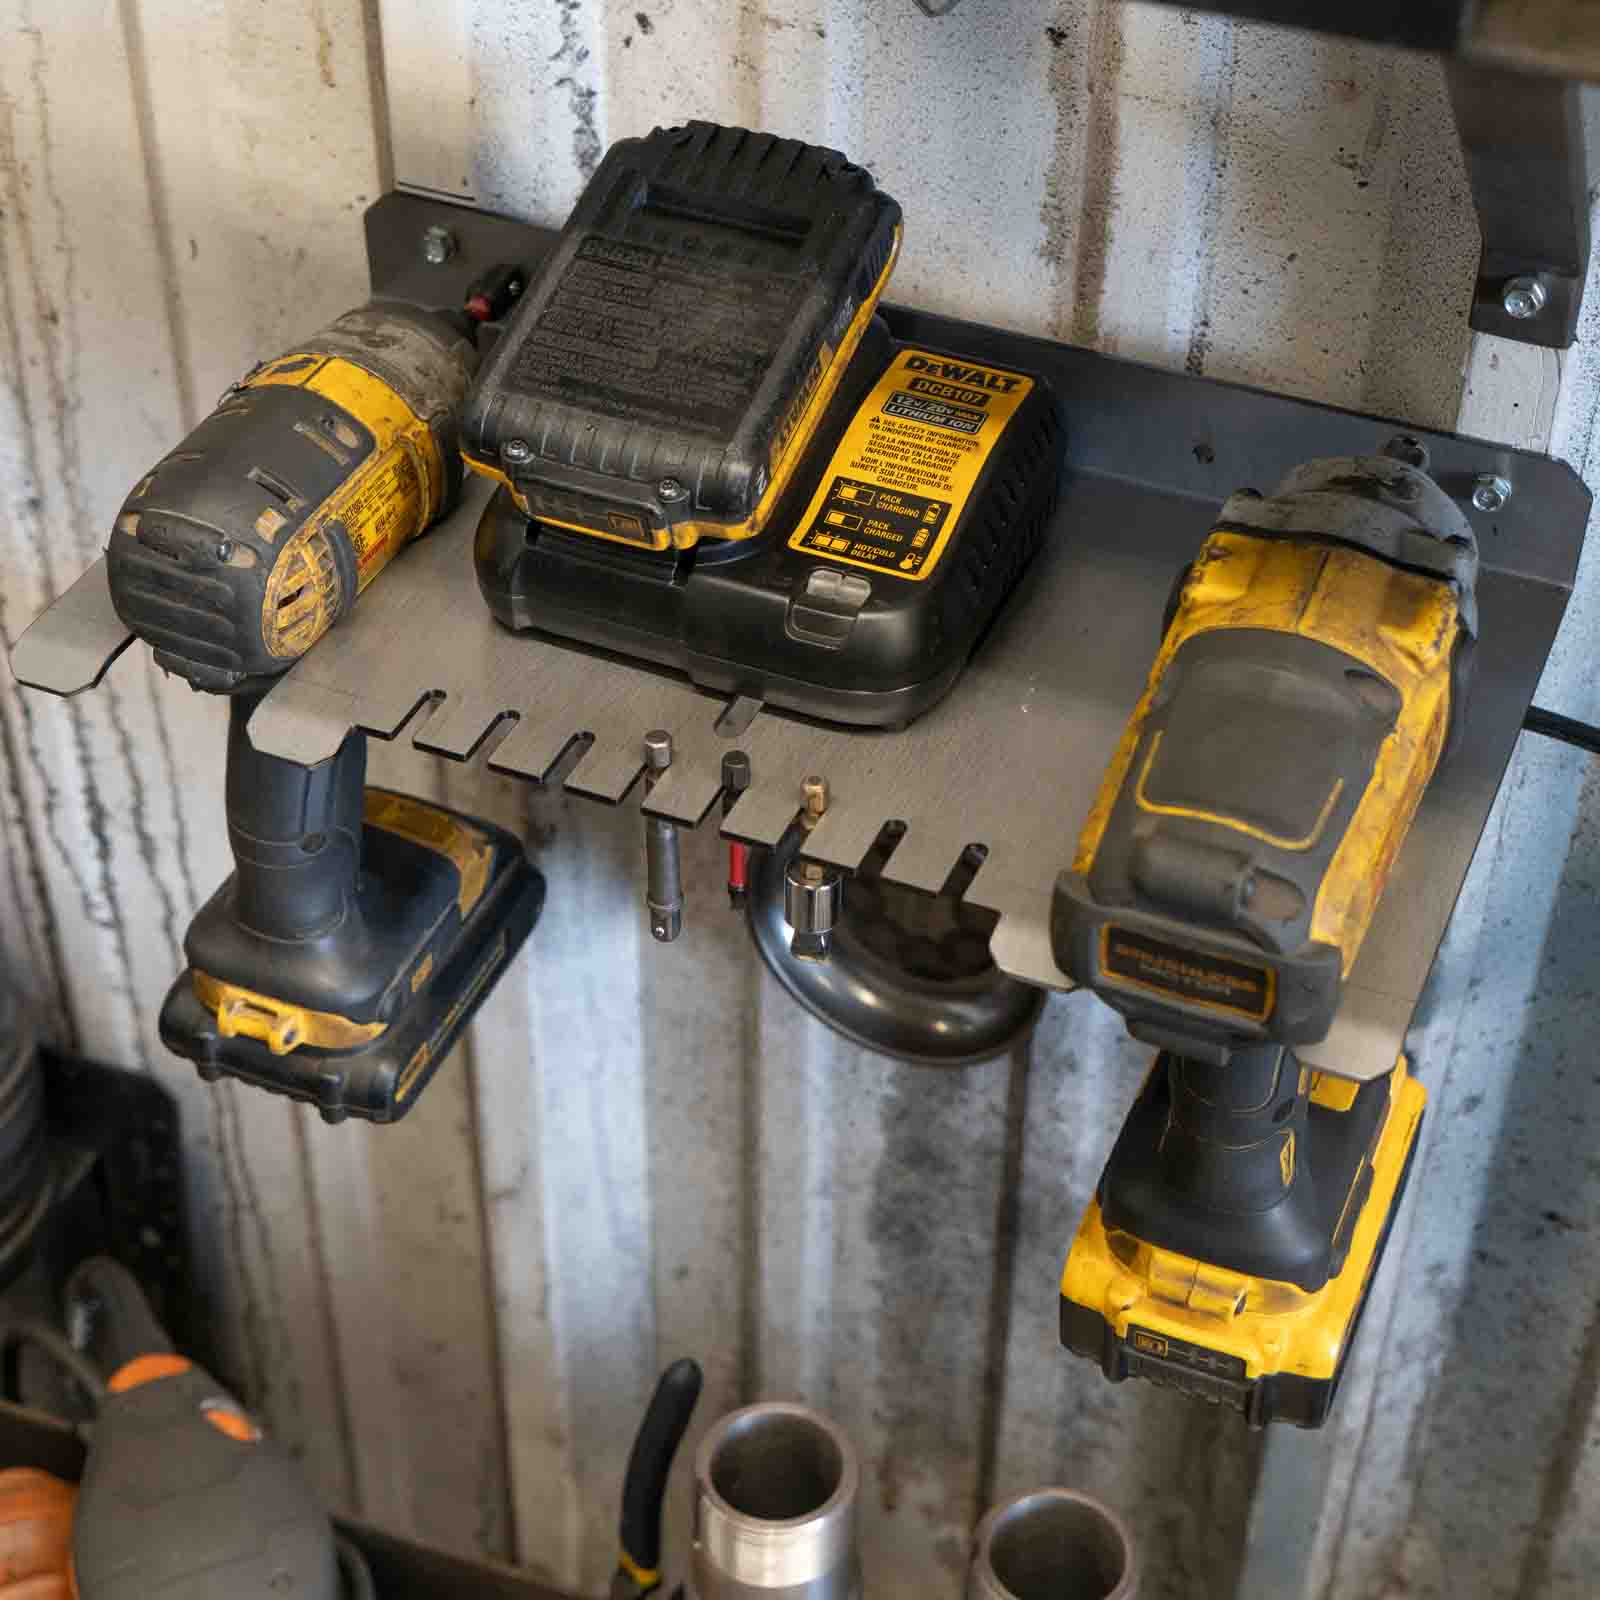 Dual Drill/Driver Holder